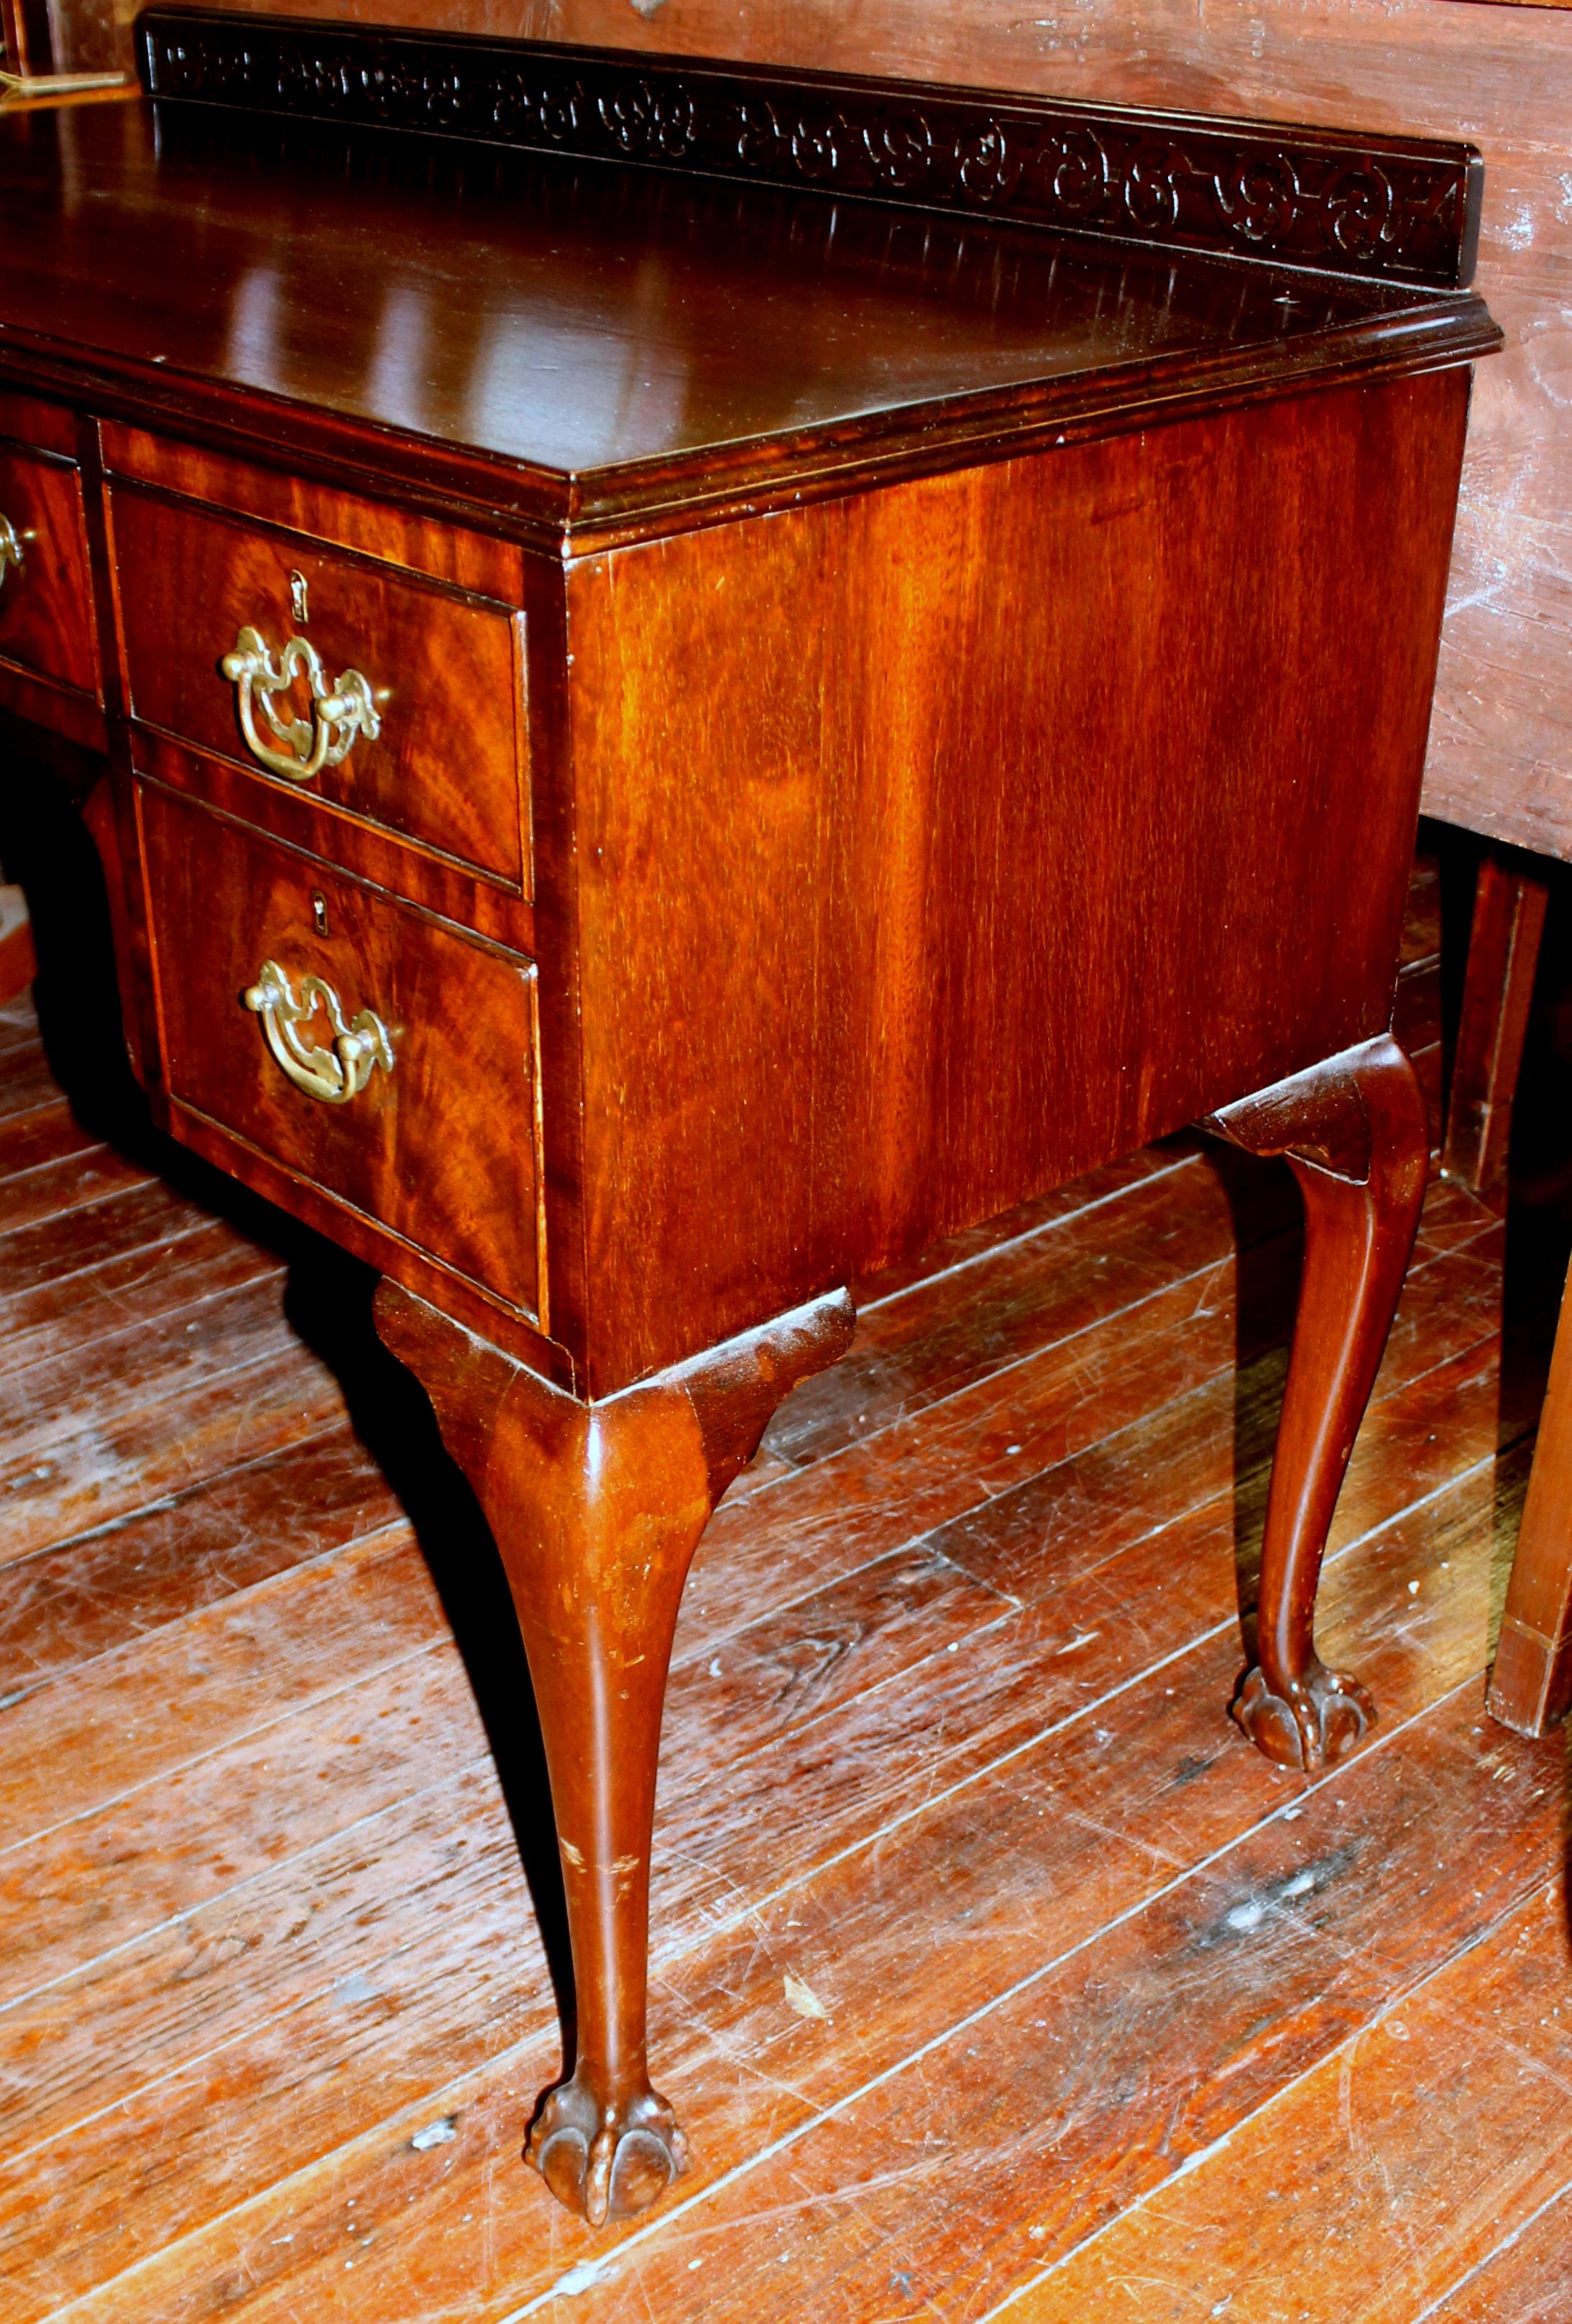 Fabulous Old English figured mahogany Chippendale style desk, Chippendale Revival made during the Edwardian period; with handsome flame or crotch mahogany veneered fronts; handsome hand carved and fretted gallery back (which is removable); lovely